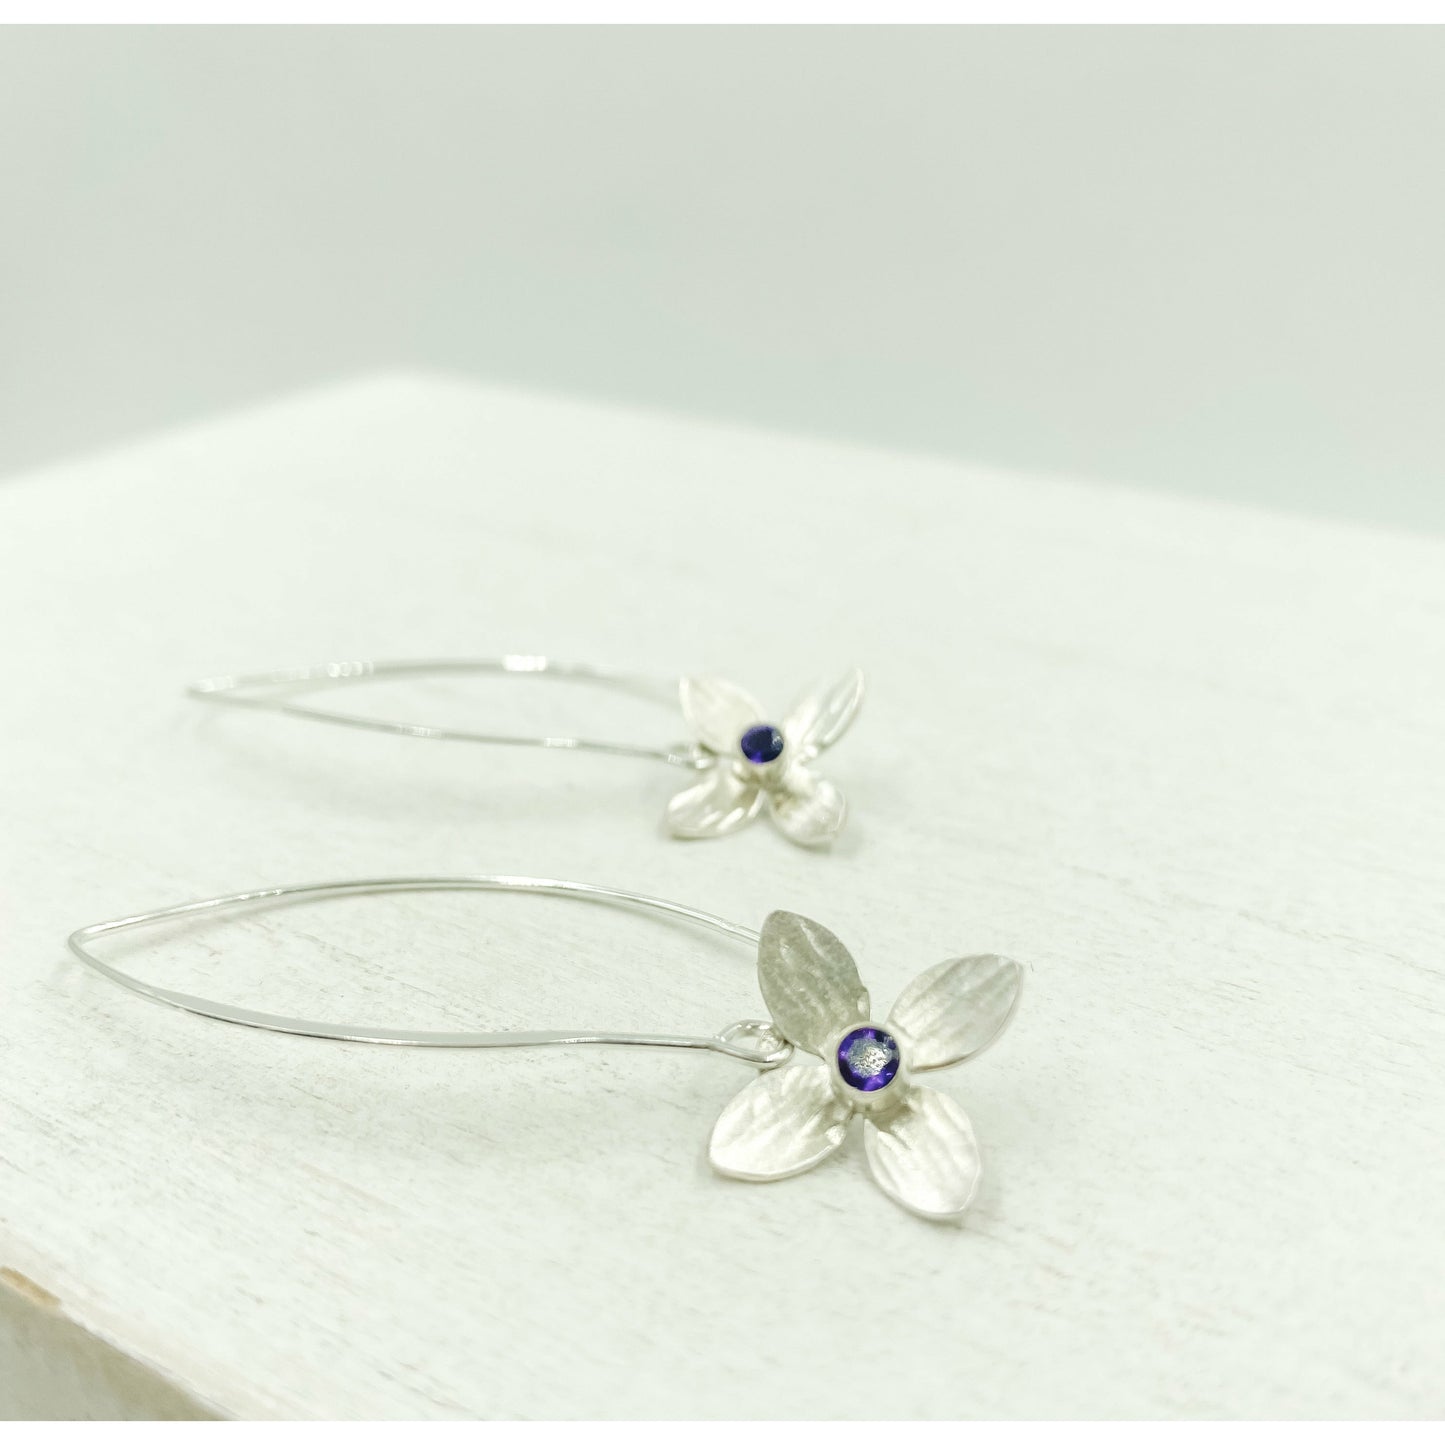 Eloquent Petals ~ Sterling Silver Flower Earring Dangles with Amethyst Gemstones - Aprilierre